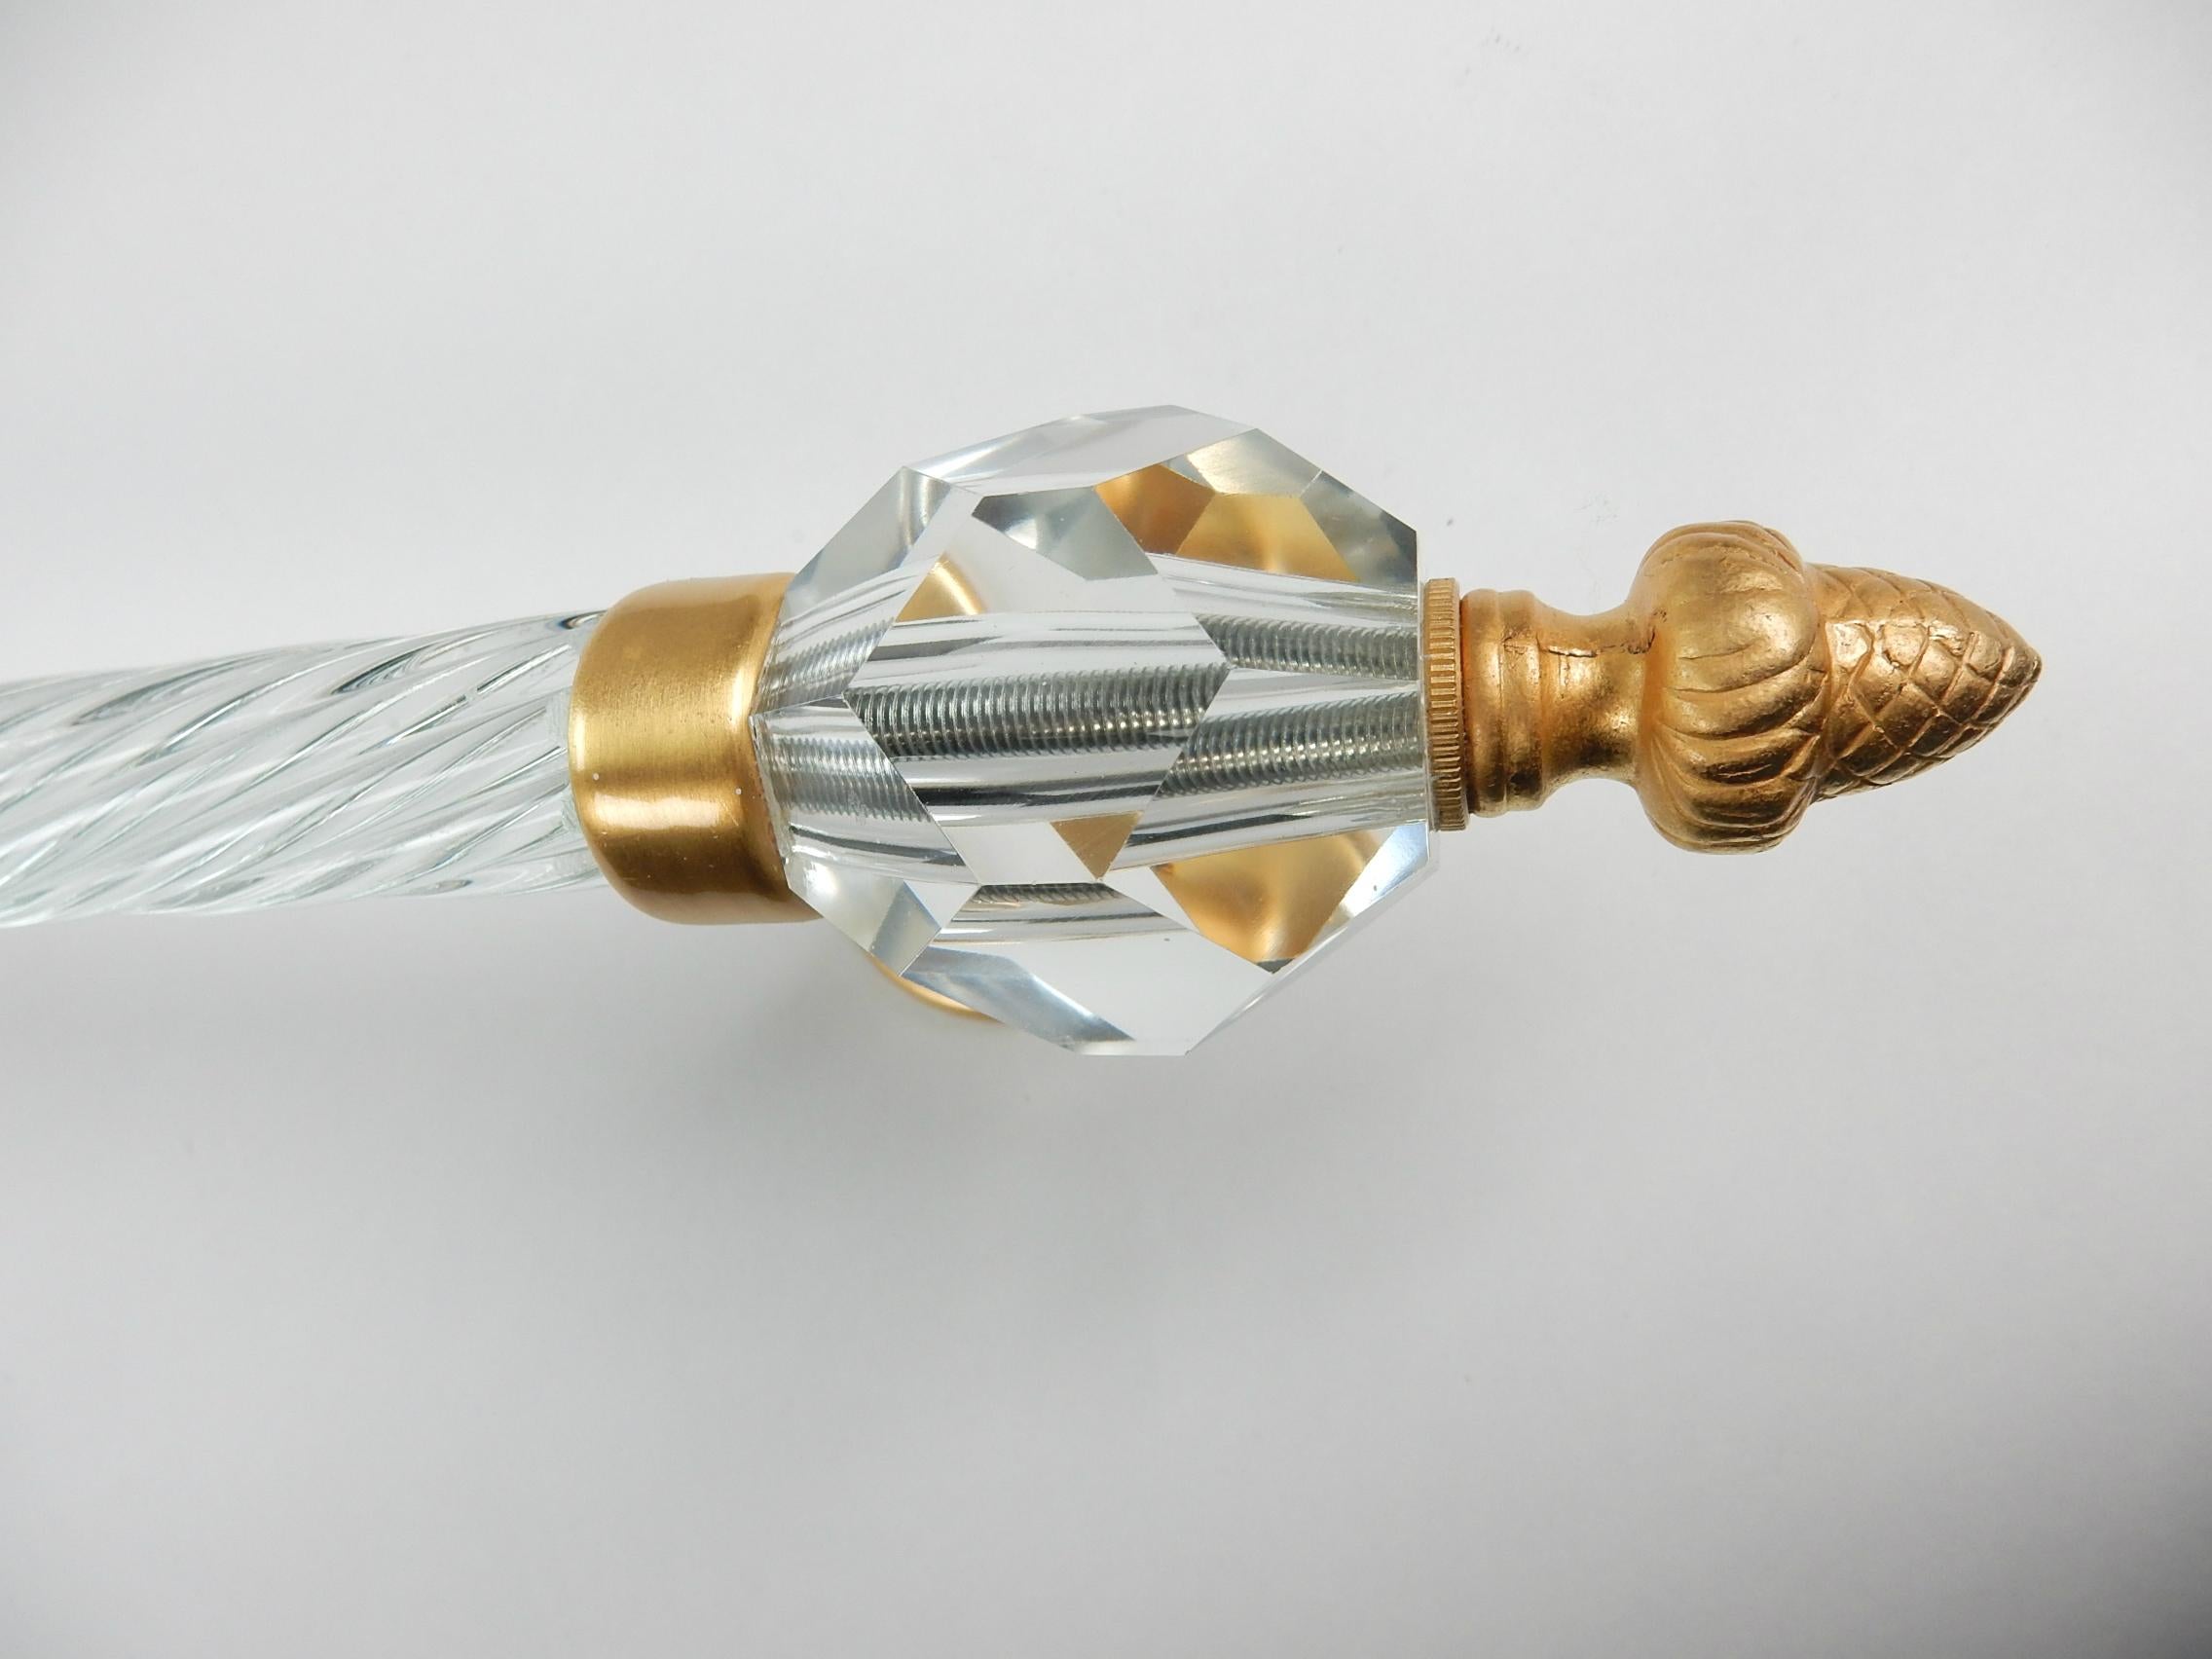 Baroque Revival Long 22-Karat Glass Towel Bar from Sherle Wagner Collection, circa 1960s